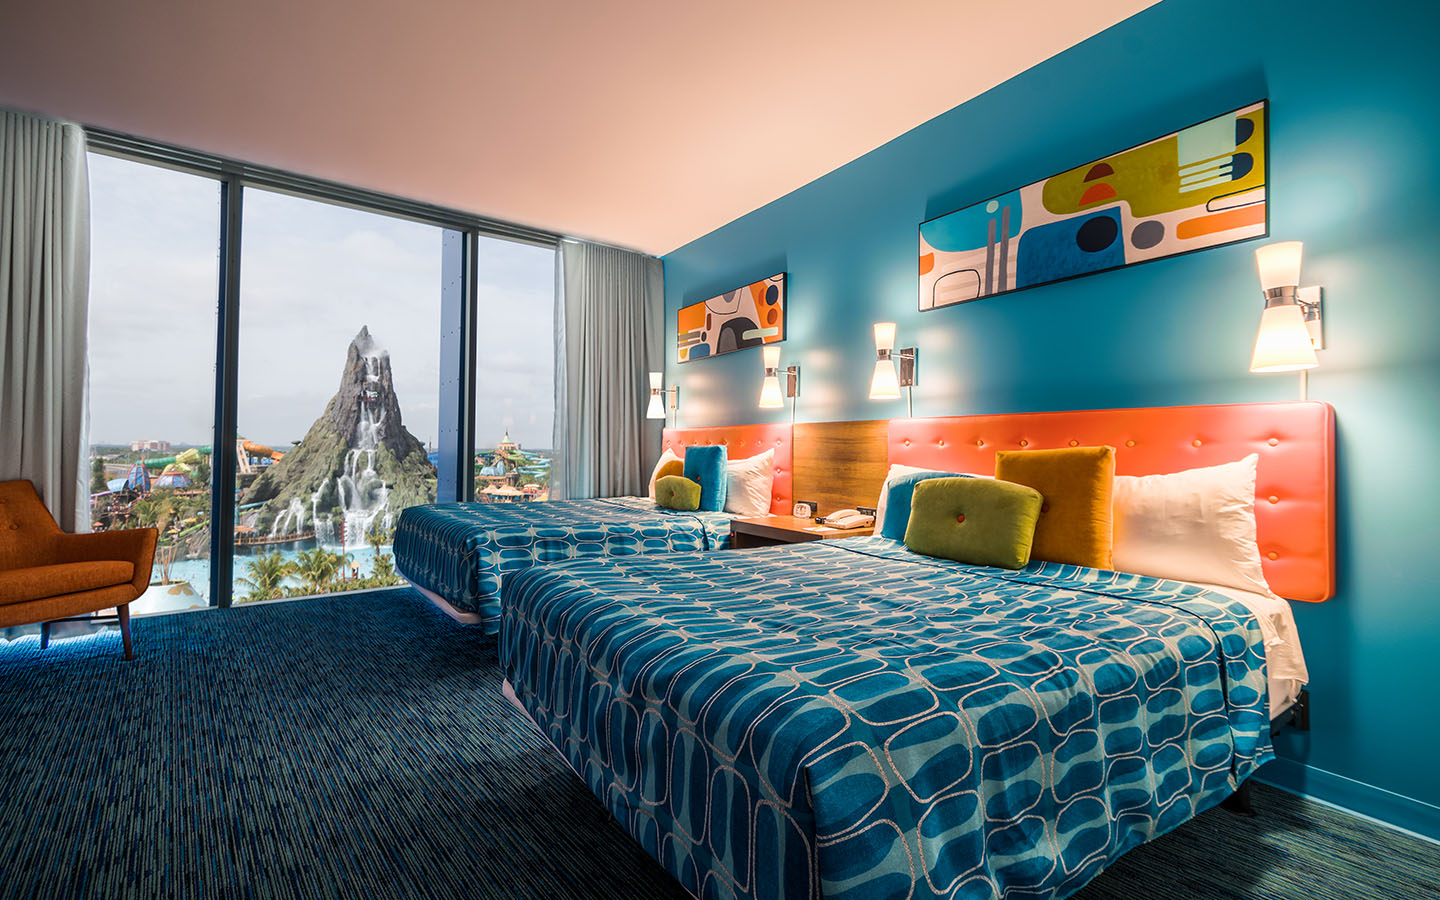 Enjoy a view of Universal's Volcano Bay when you stay at the new Universal's Cabana Bay Towers.